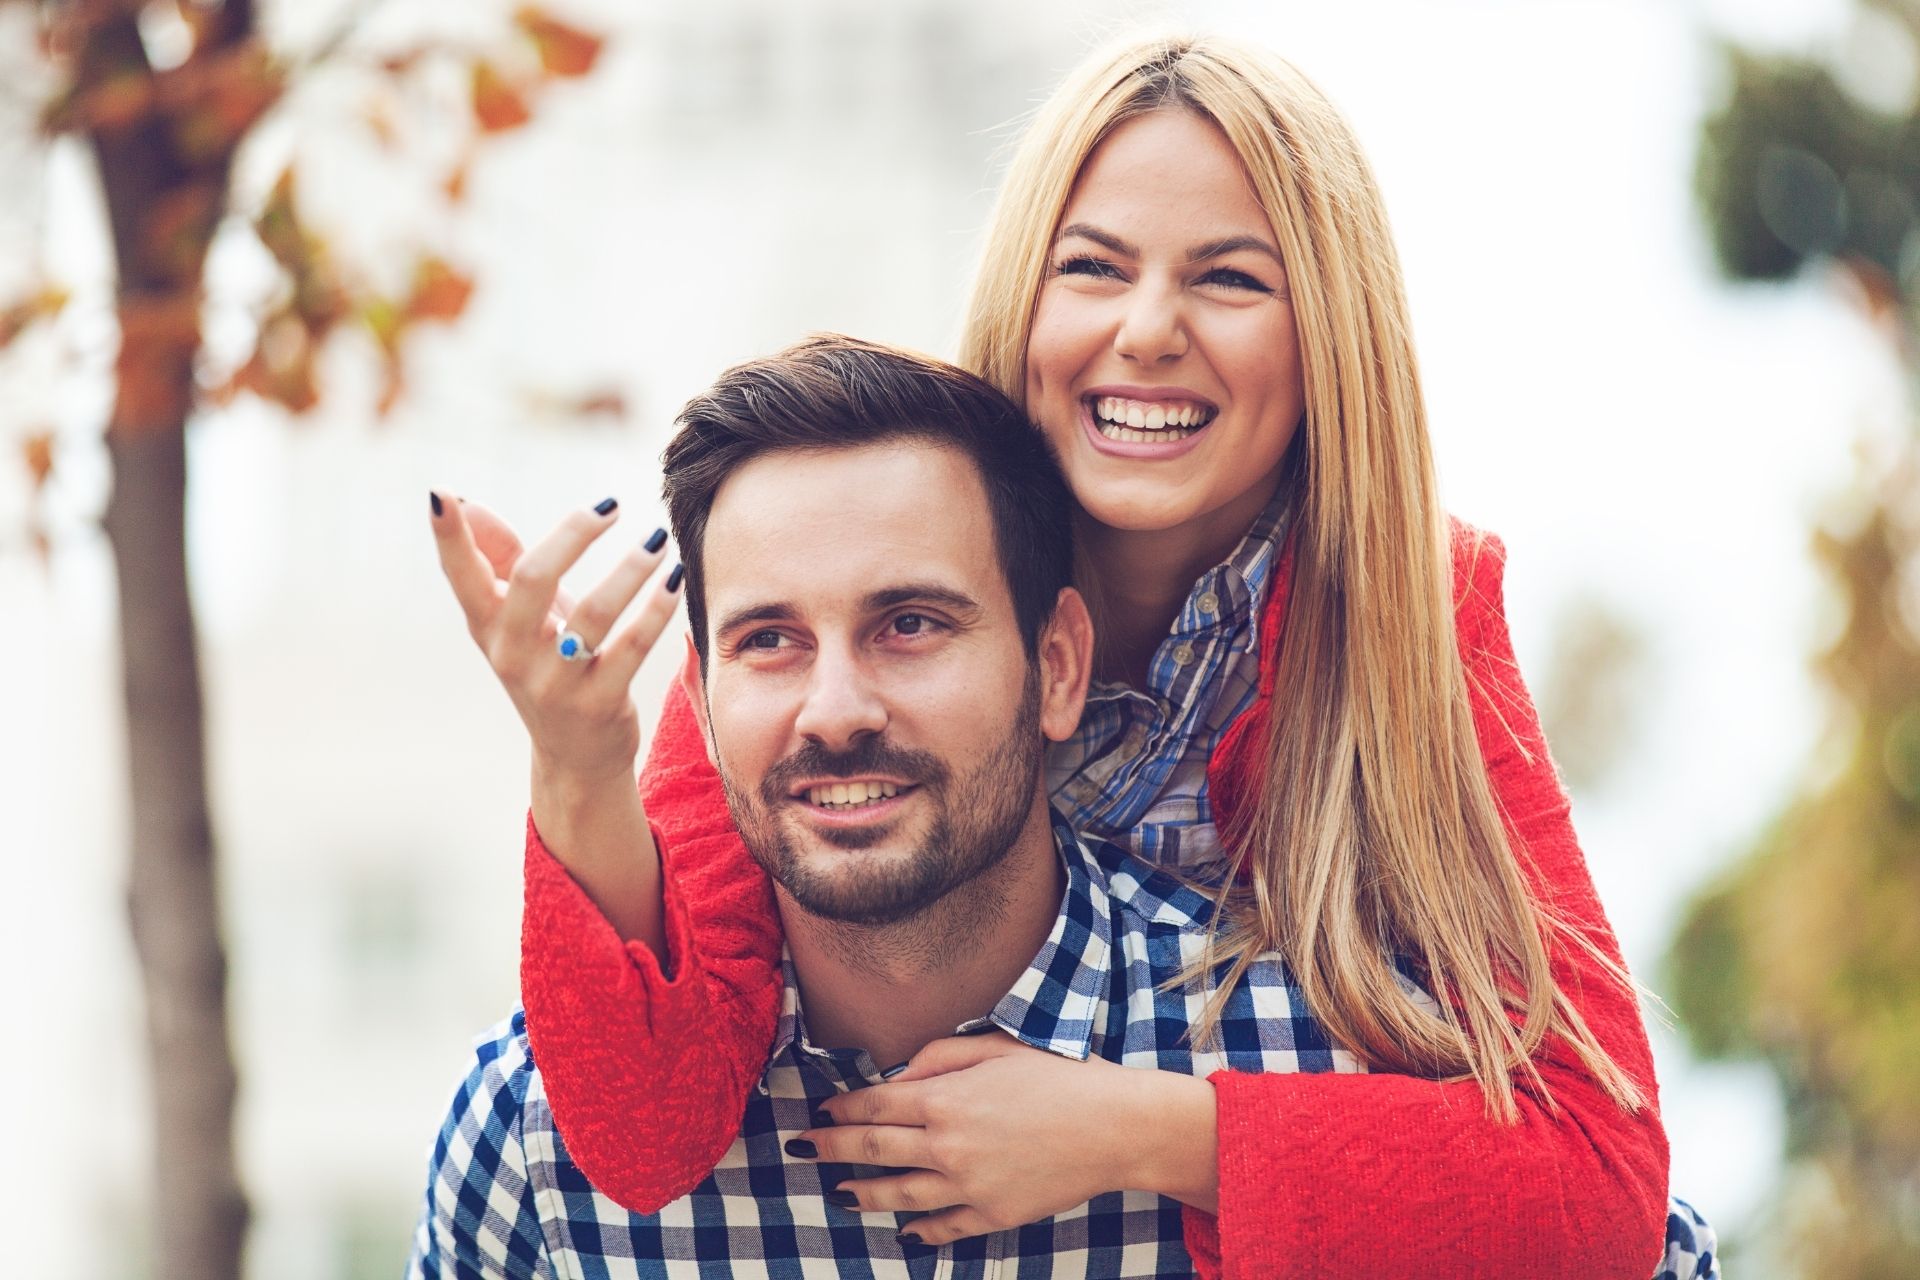 daliy habits that will Strengthen Your Marriage every day